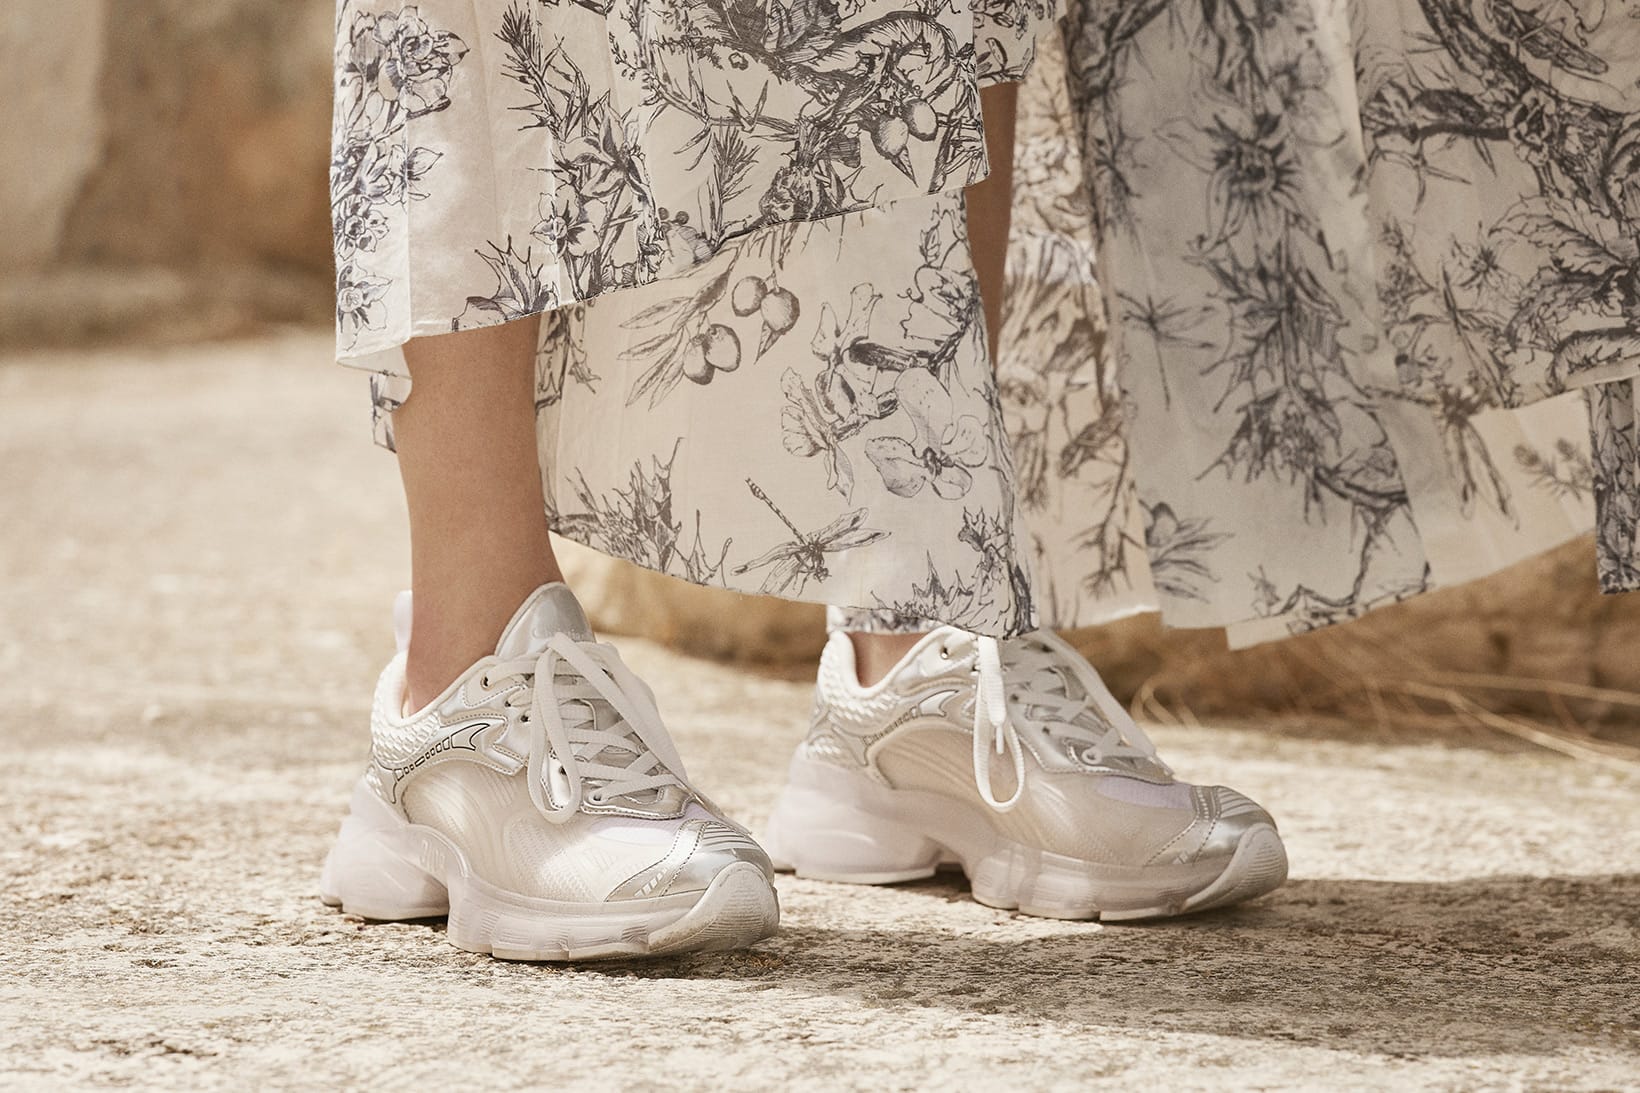 Dior Releases New Vibe Sneakers in Gold & Silver | SistemikleinShops